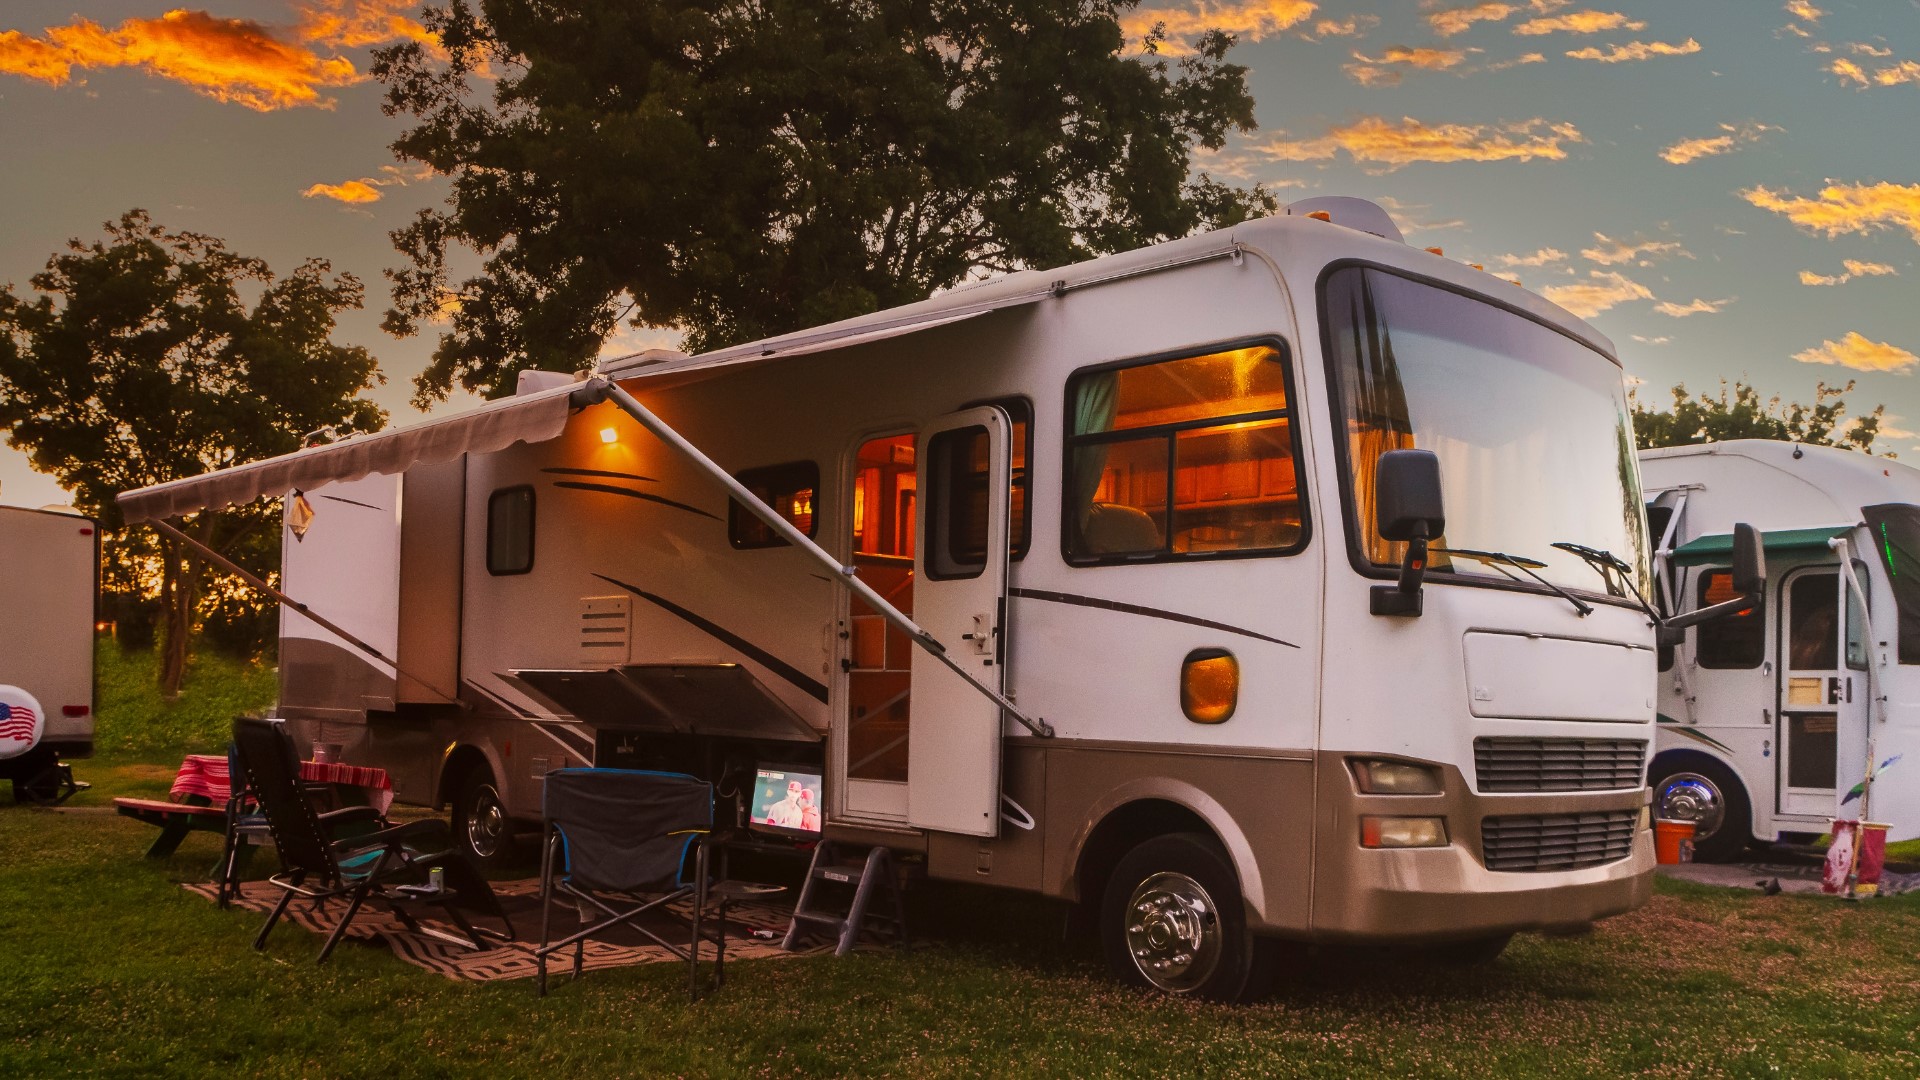 If you're planning an overnight stay, your mind probably goes to hotels or home rentals. But a camper may be a good option for your family.